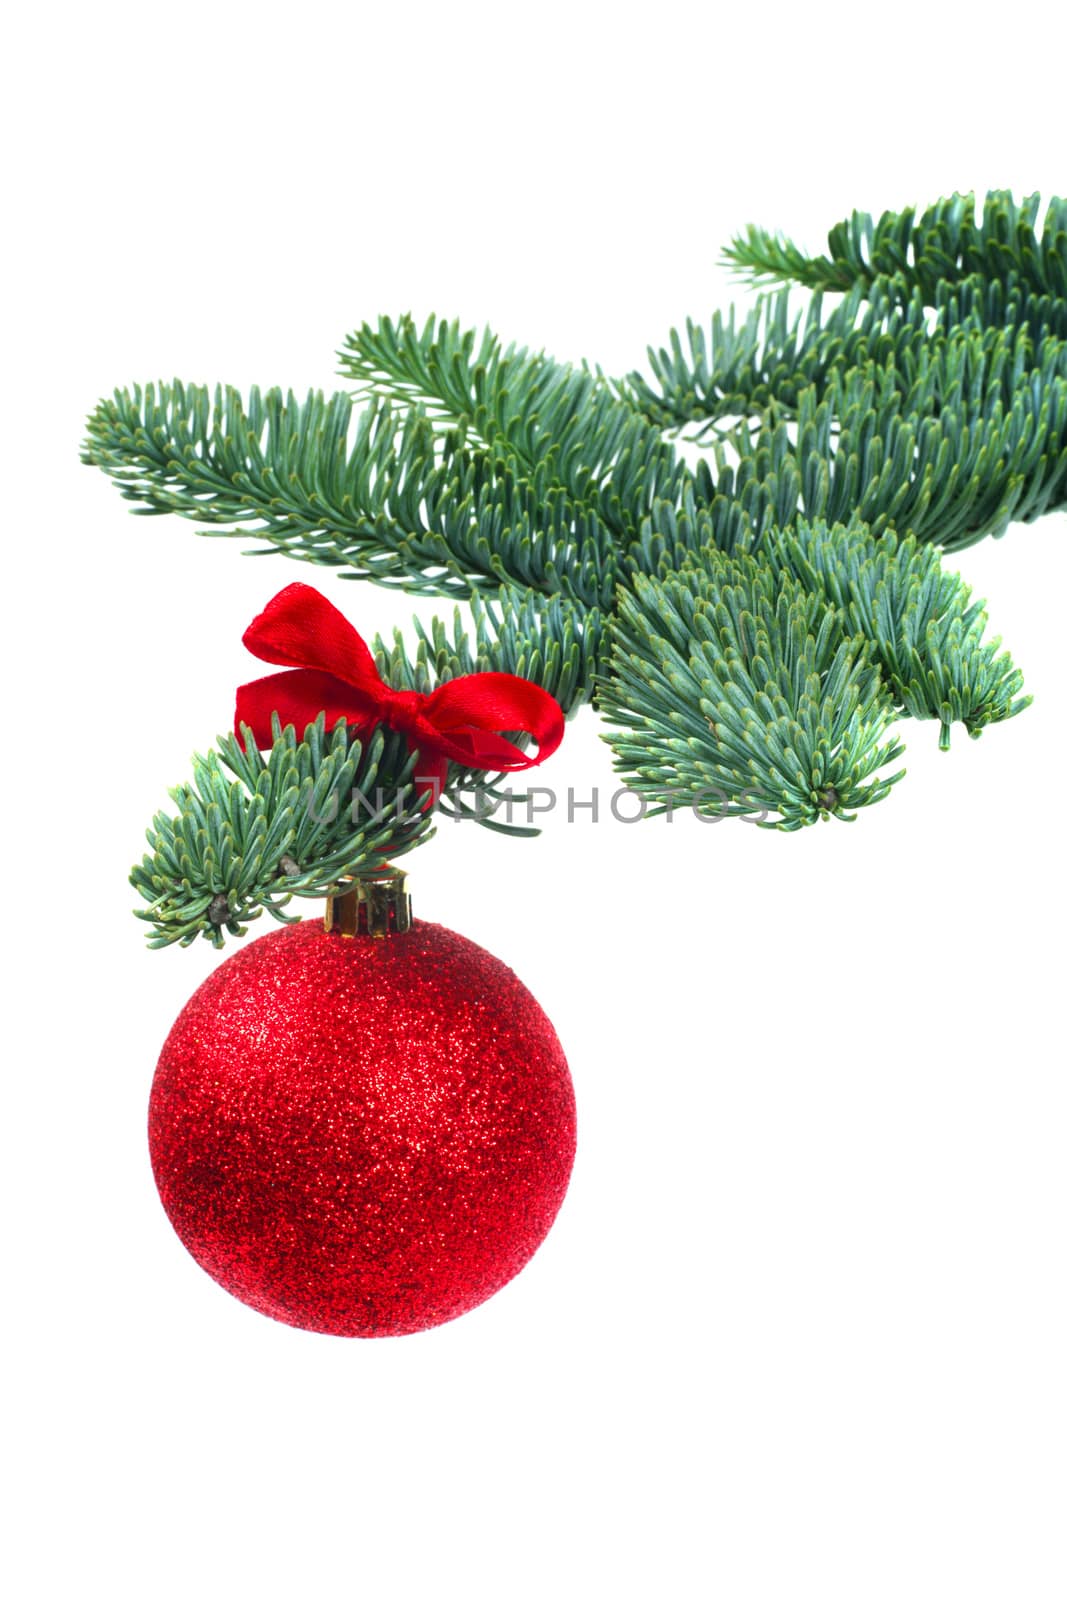 Christmas evergreen spruce noble fir tree and red glitter glass bauble ball isolated on white background